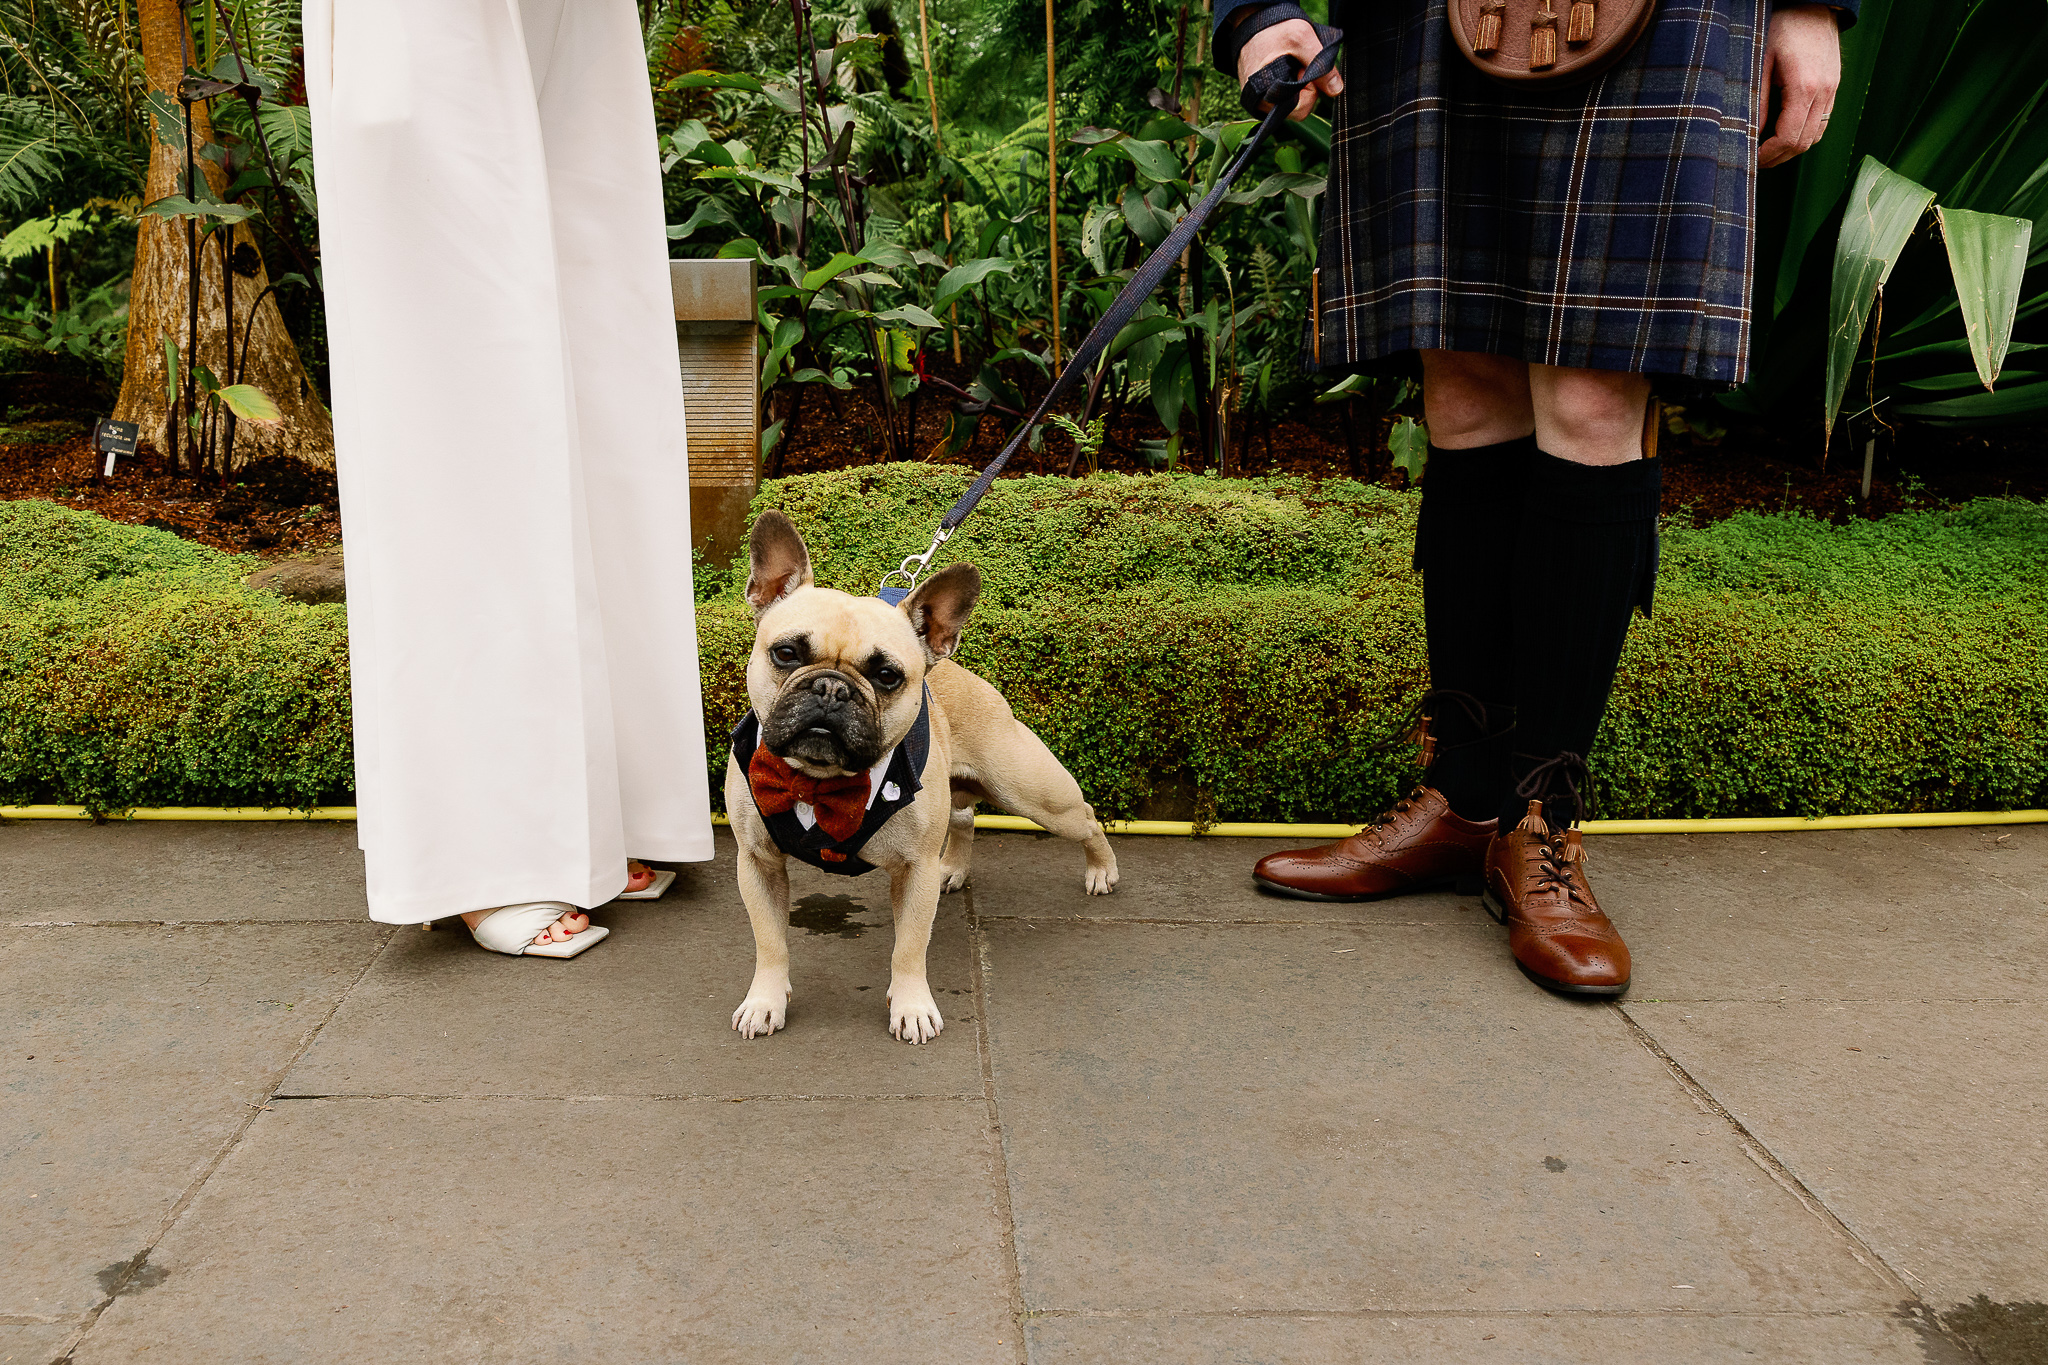 Dogs at Weddings wearing bow ties